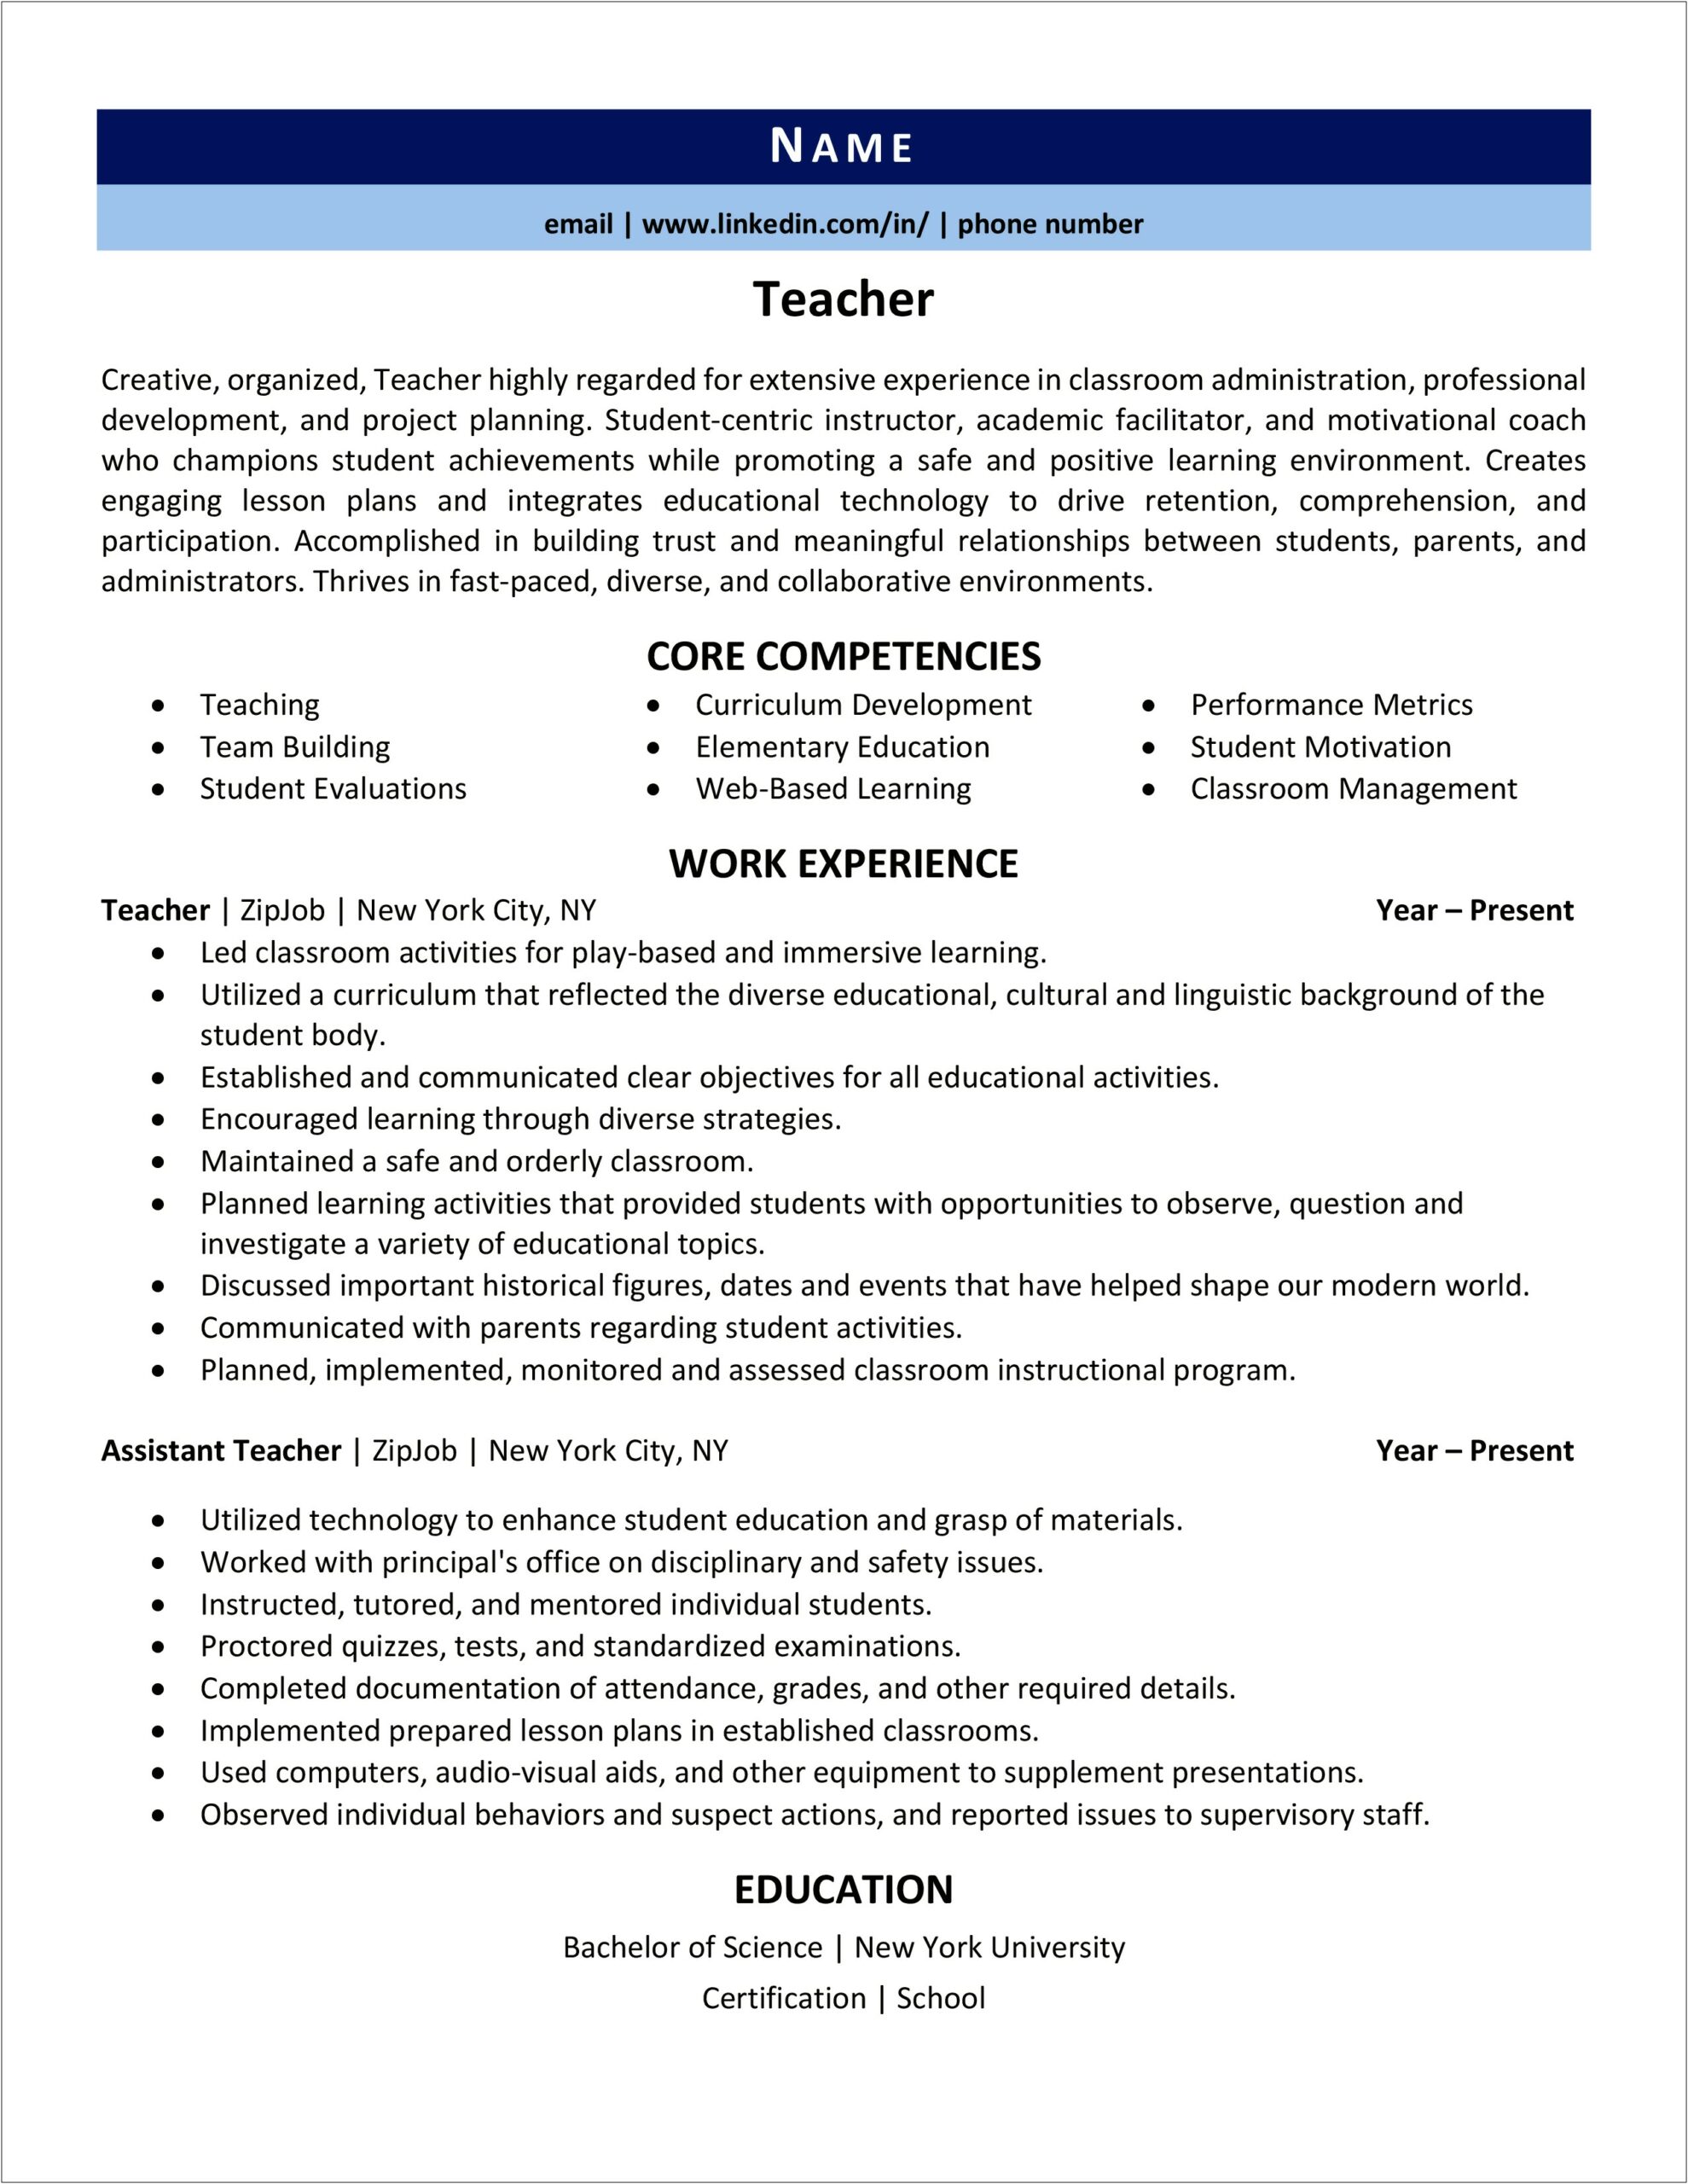 Sample Student Teaching Resume In Early Childhood